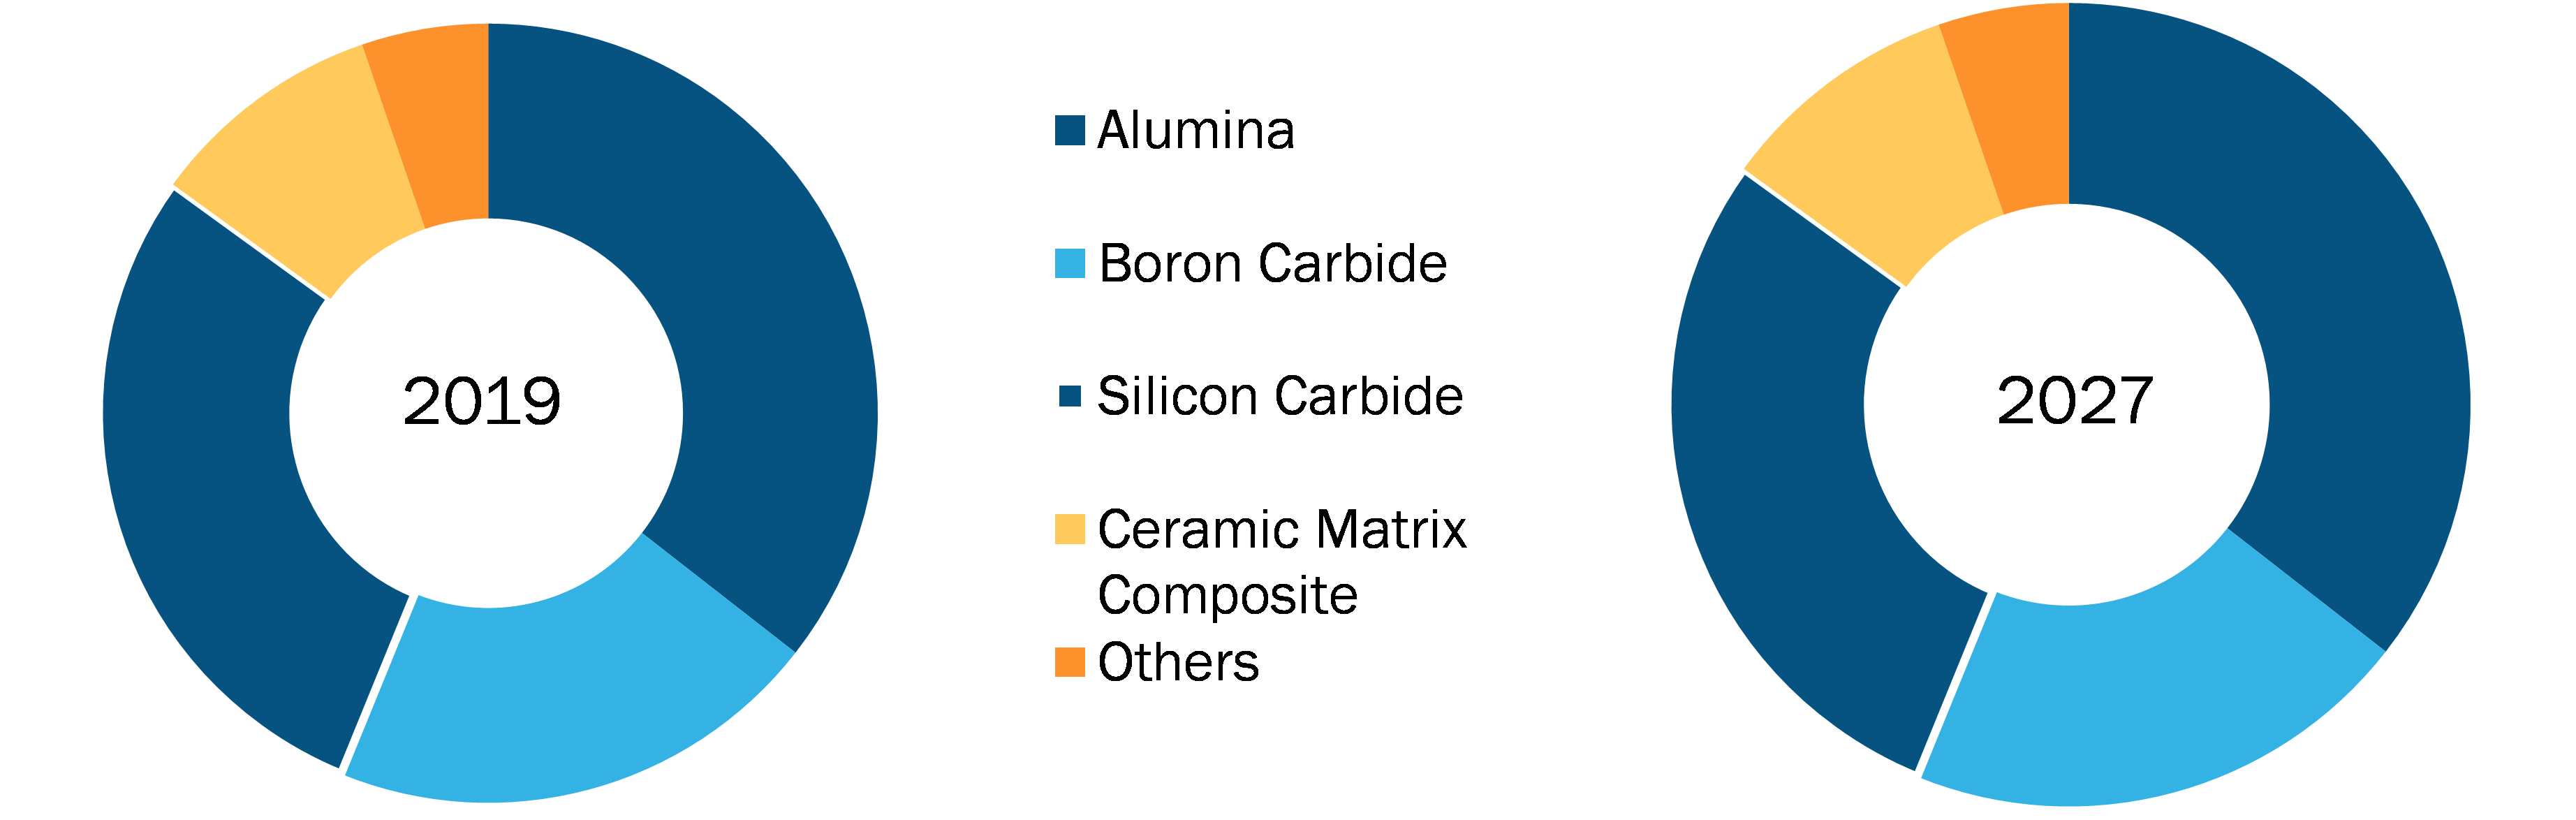 Ceramic Armor Market, by Material Type – 2019 and 2027